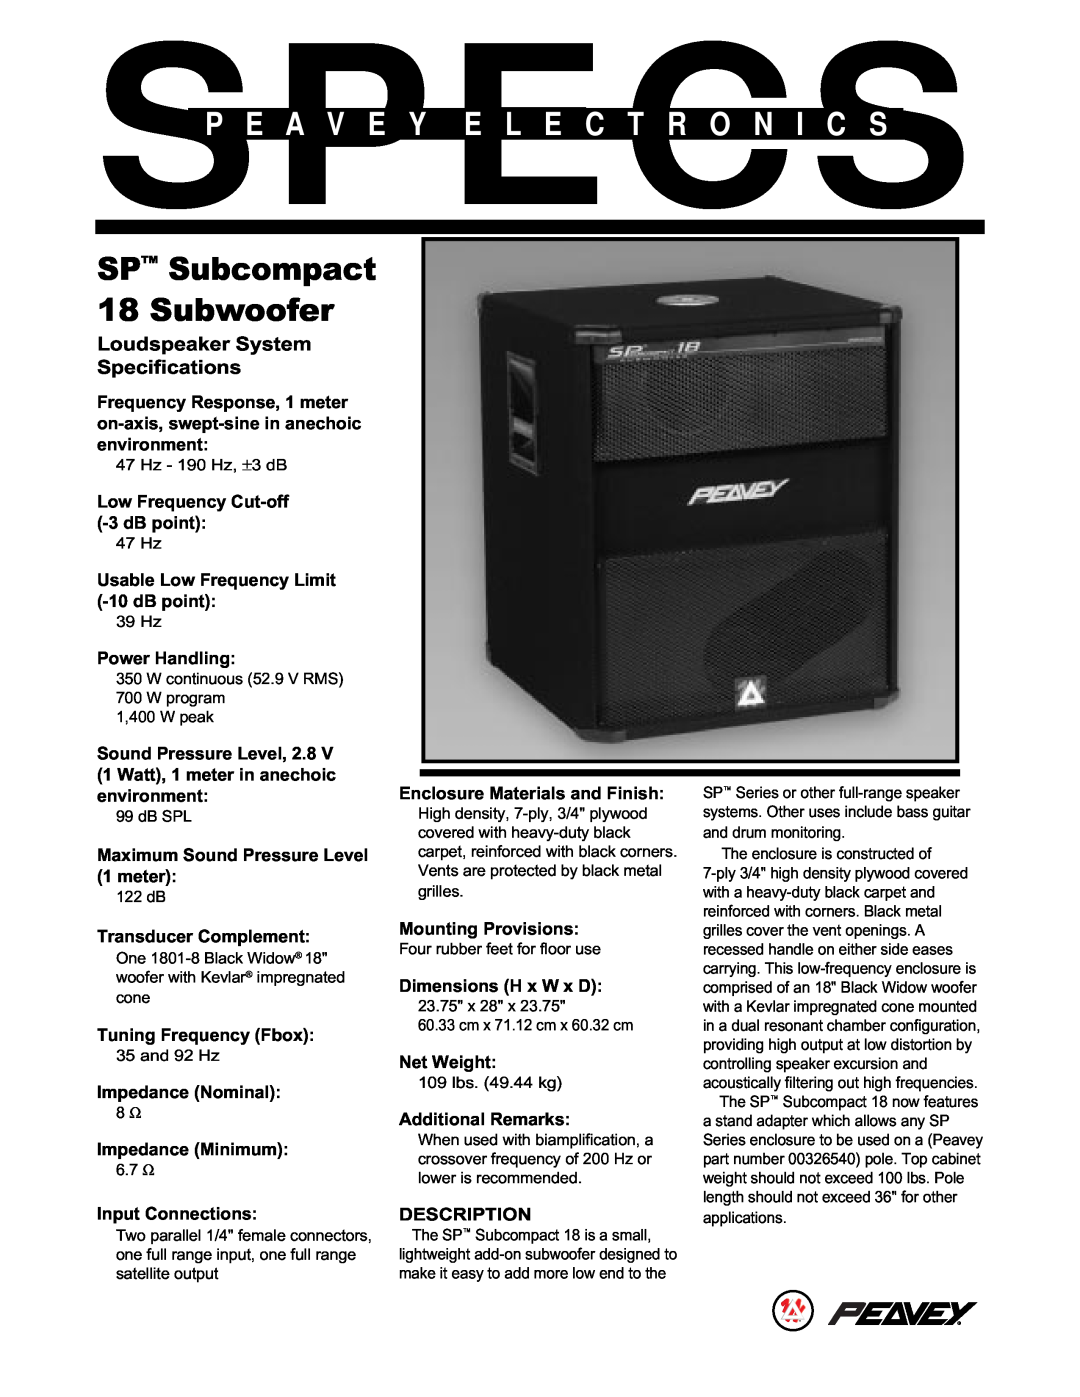 Peavey specifications SPª Subcompact 18 Subwoofer, Loudspeaker System Specifications 